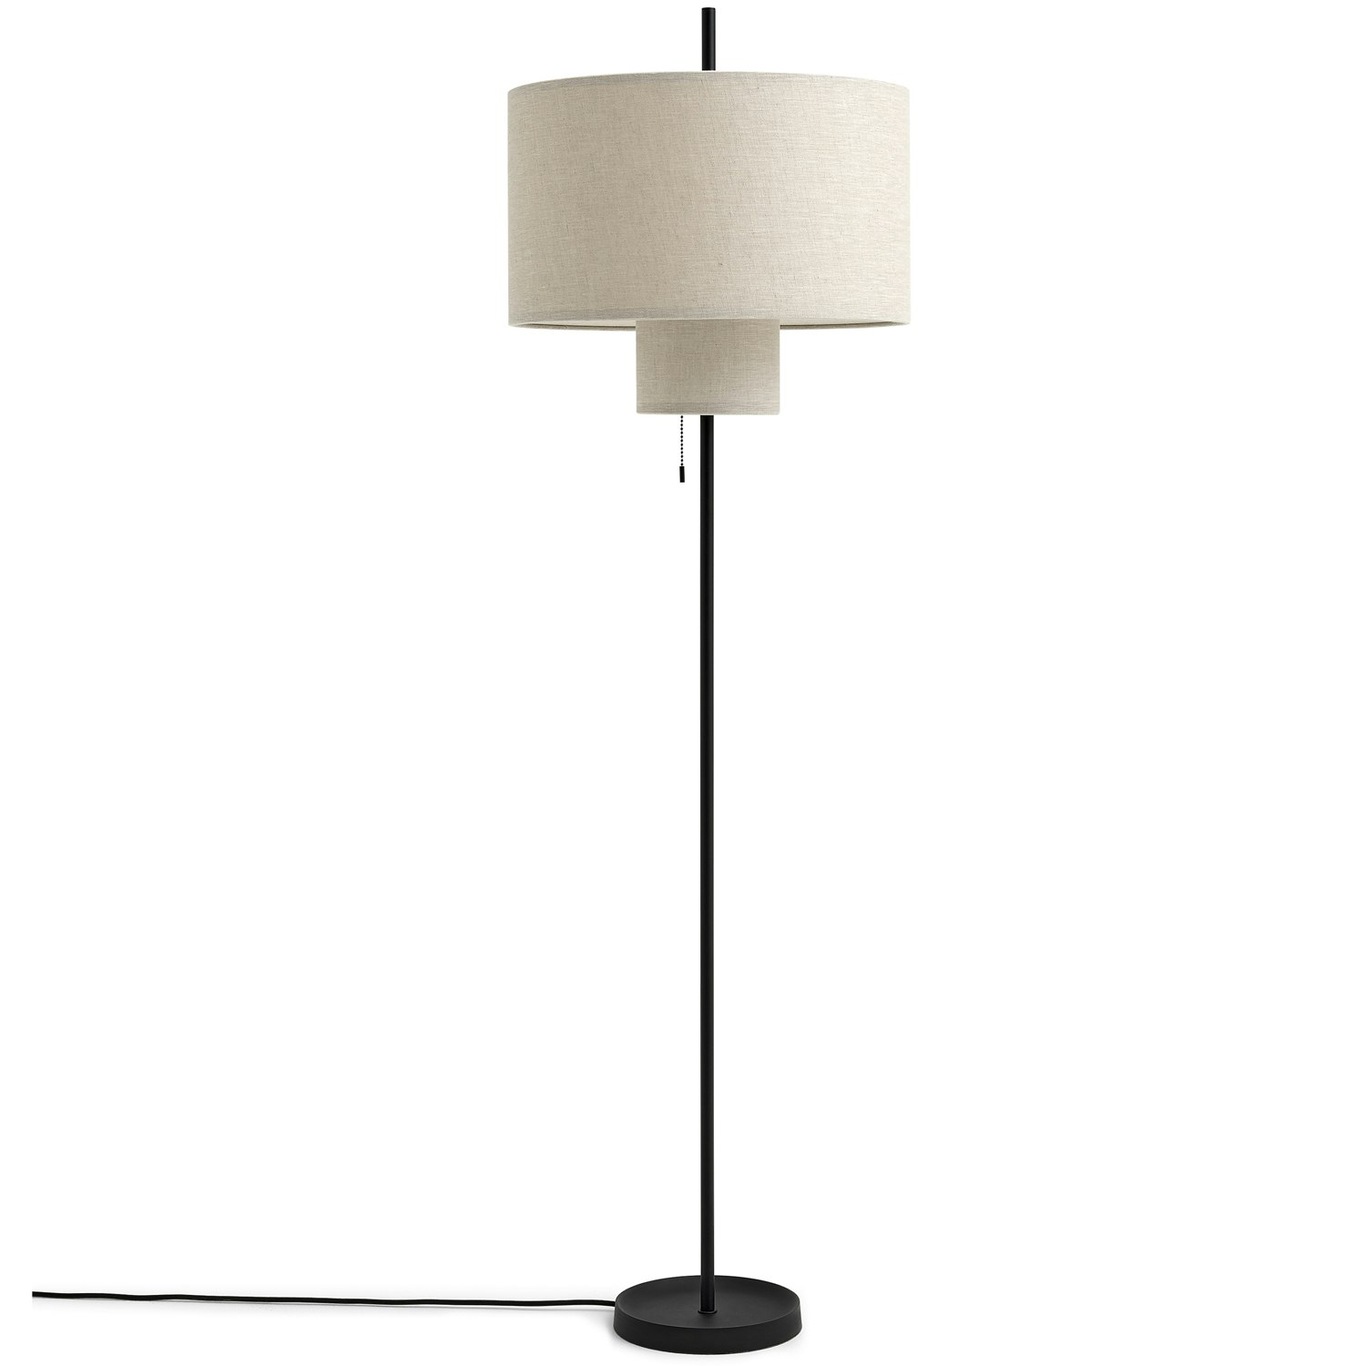 Margin Table Lamp  Buy New Works online at A+R